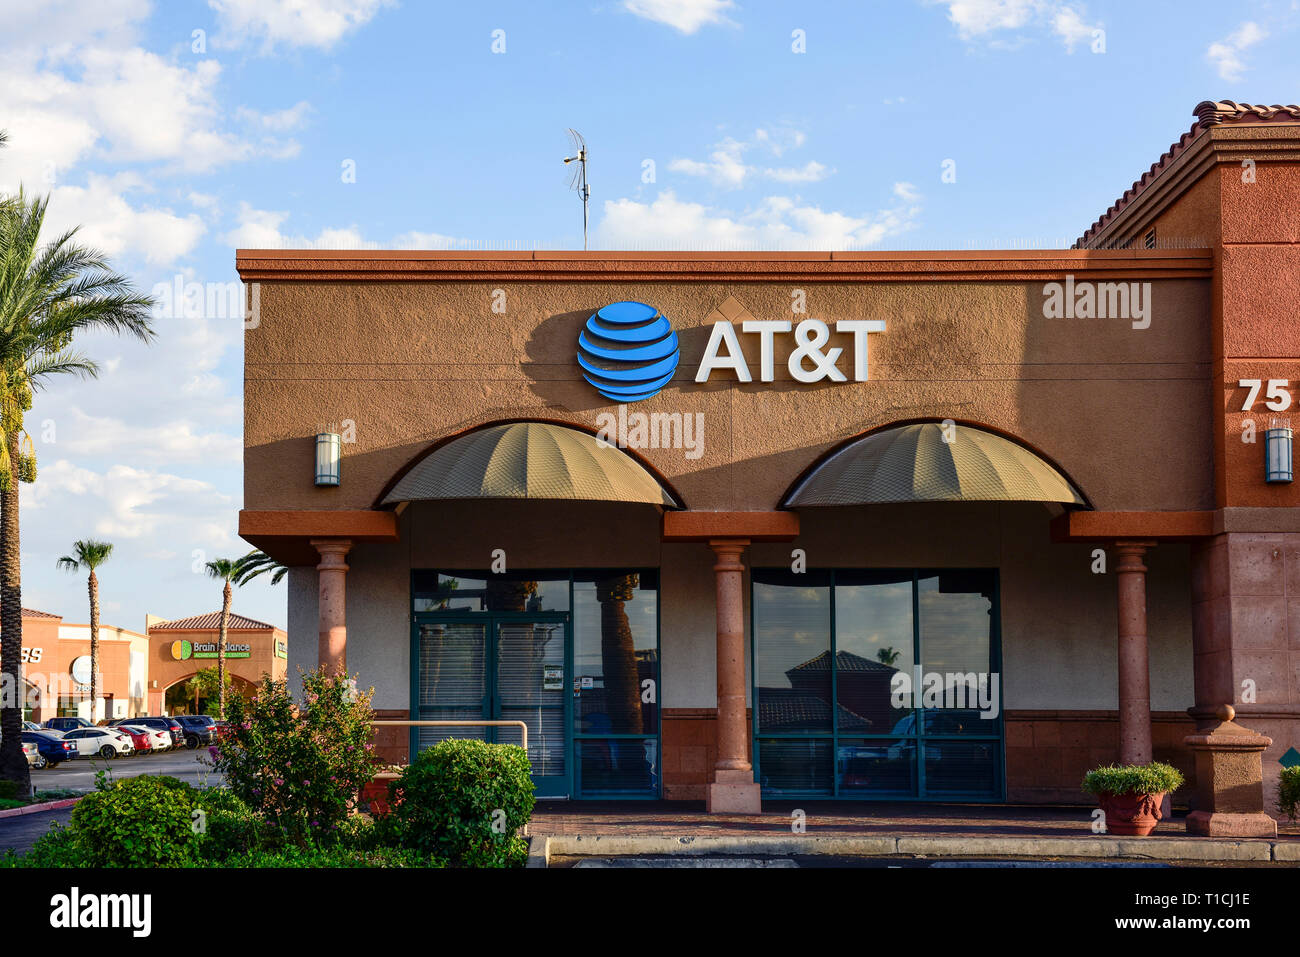 At&t storefront in Las Vegas at night Stock Photo